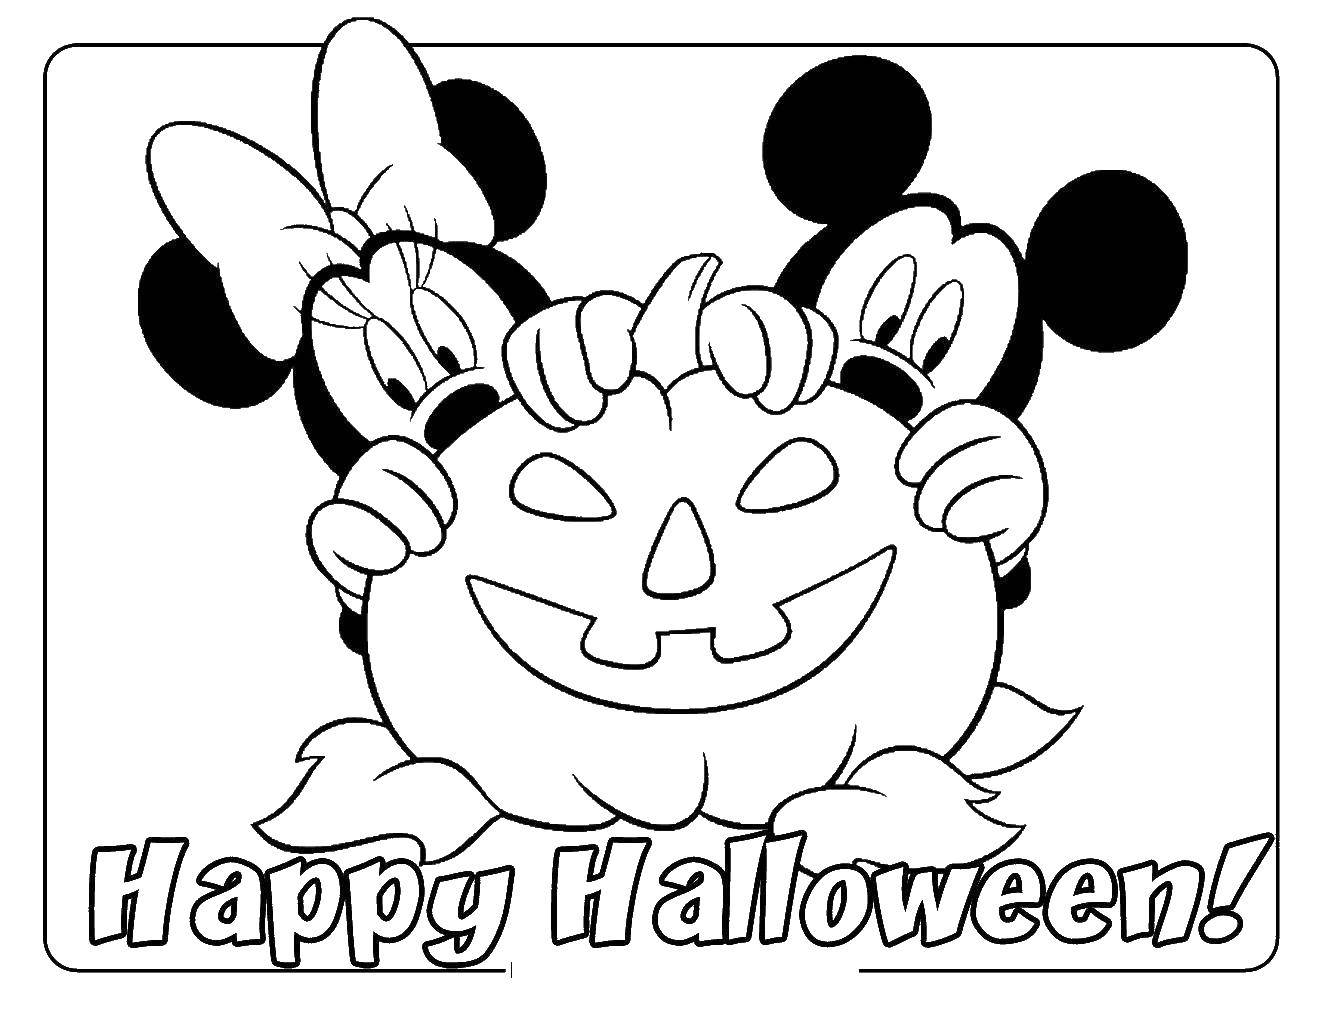 Coloring Mickey and Minnie mouse hid behind the pumpkin. Category Halloween. Tags:  Mickymaus, Halloween.